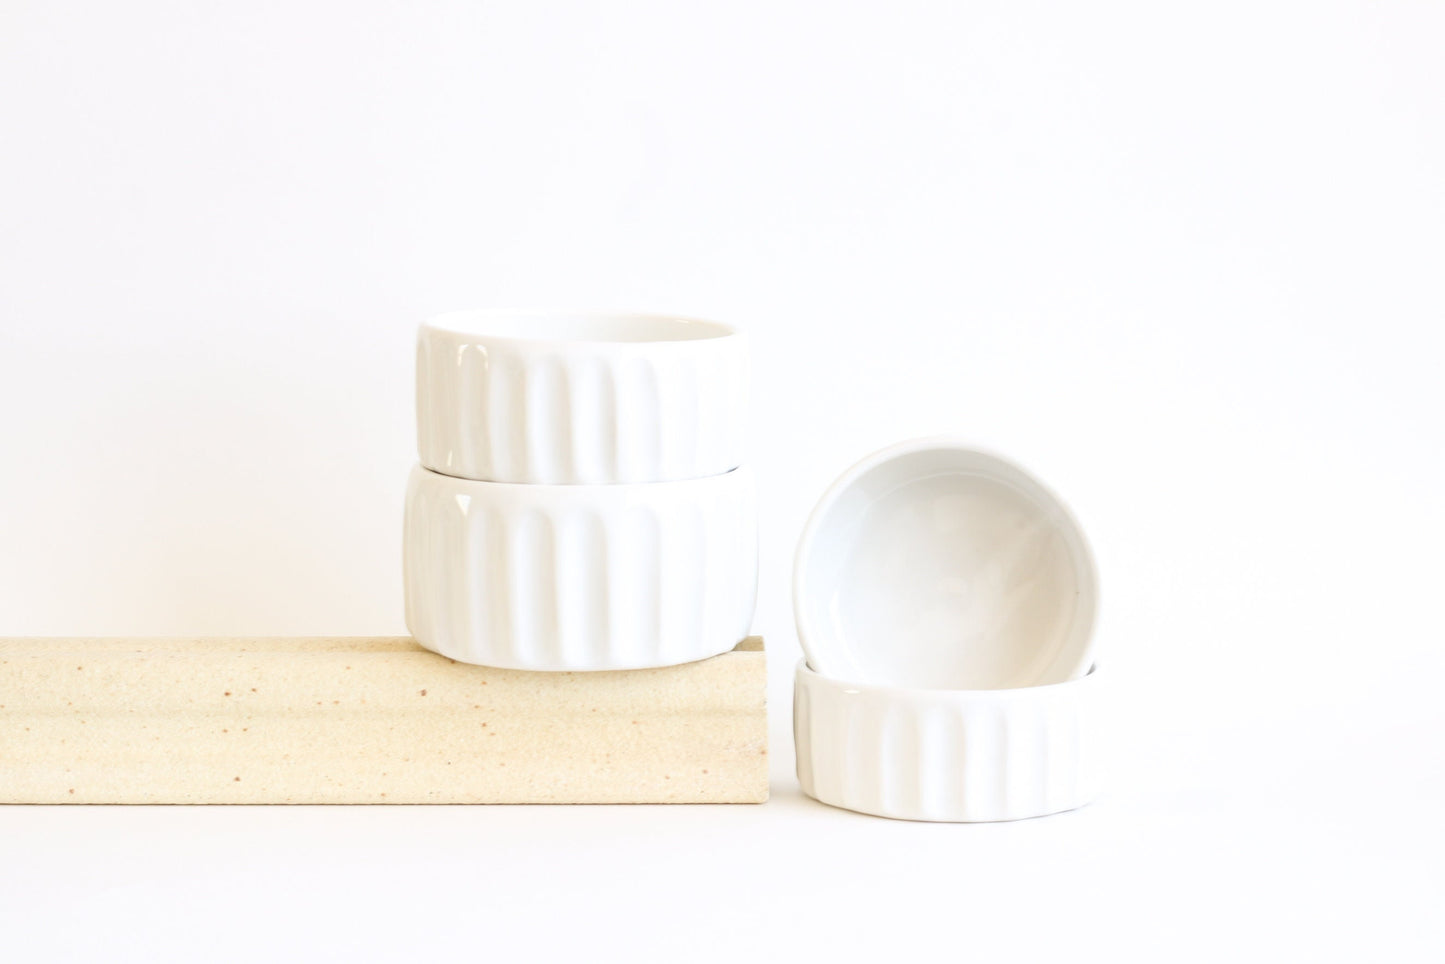 White Porcelain Ramekins - Wheel Thrown and Hand Carved Porcelain Ramekin Dishes for Cooking